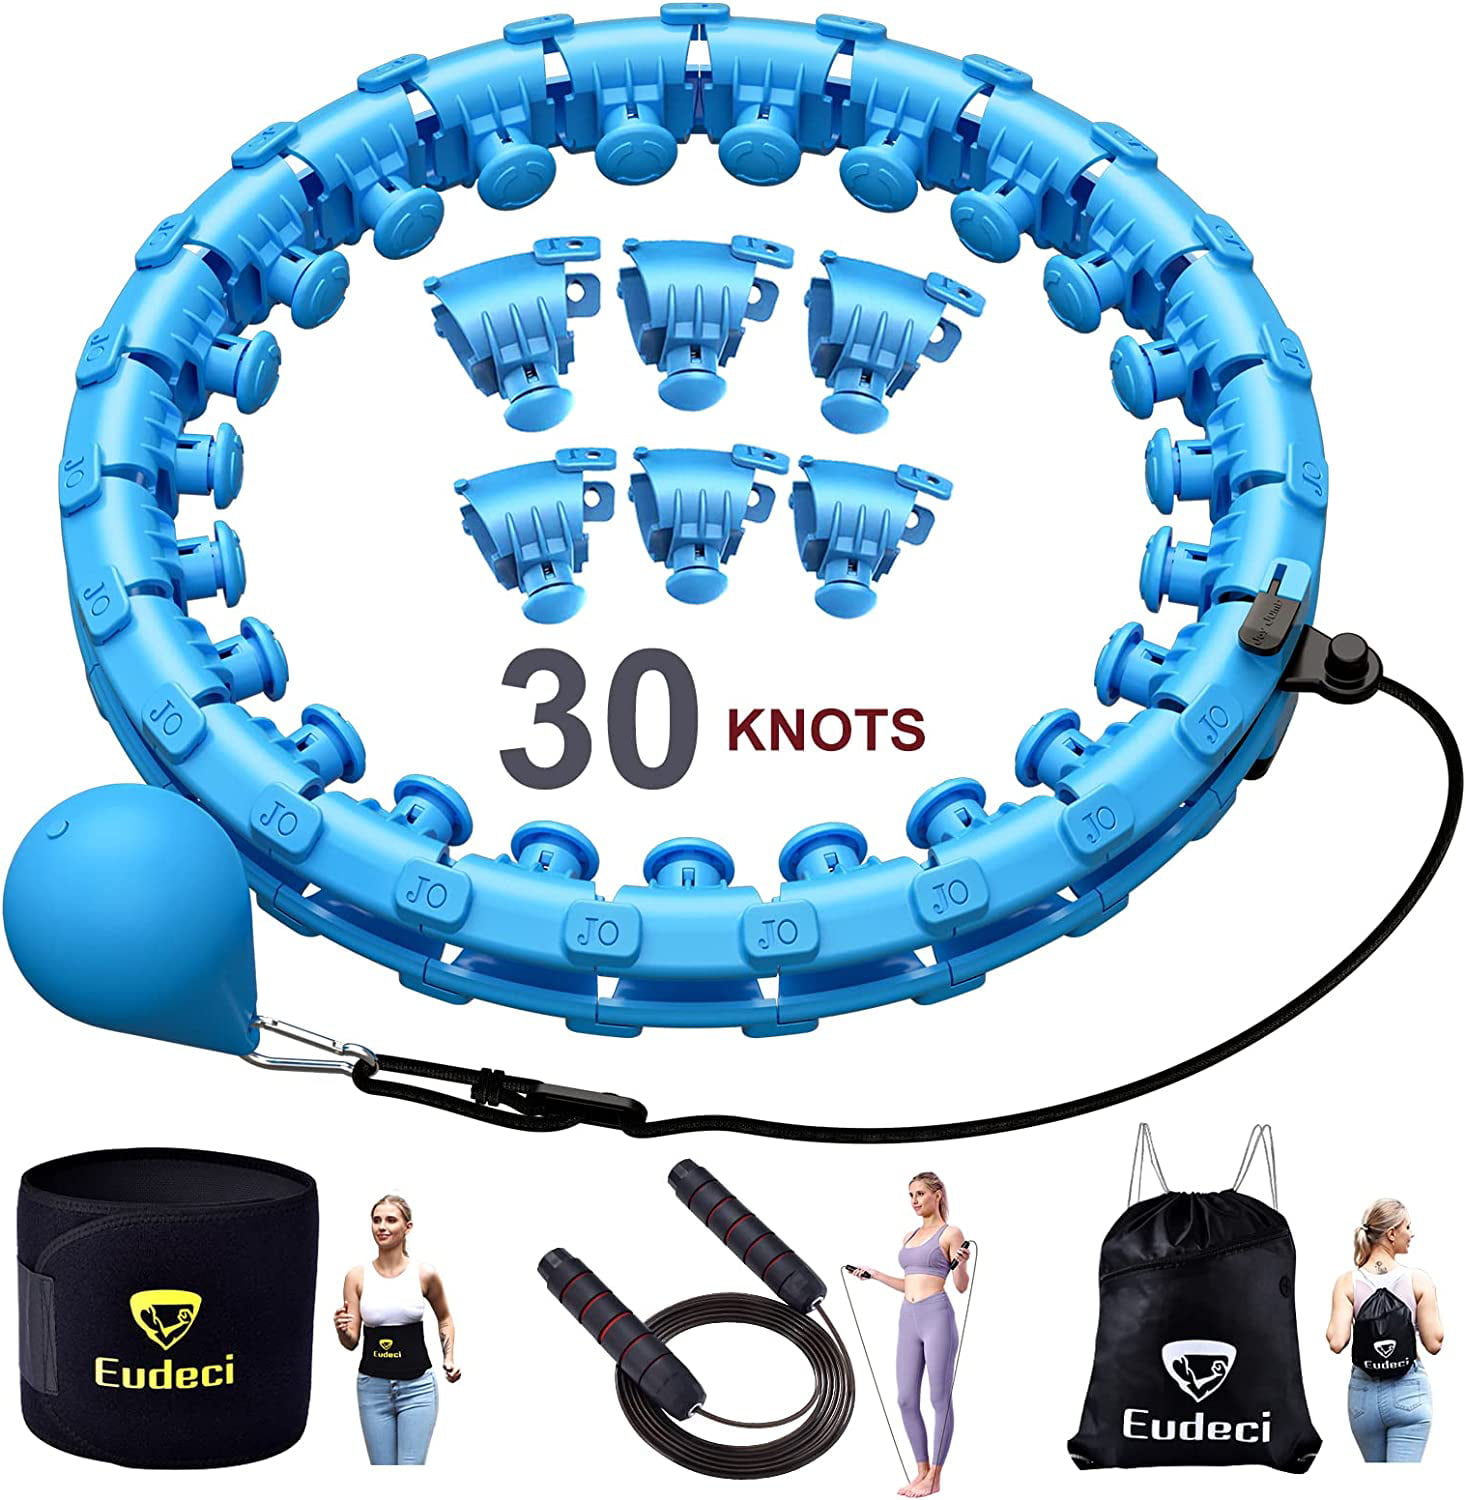 23 Detachable Knots,with Counter and Up to 1lb Soft Gravity Balls,Adults and Kids Ideal Home Workout Equipment YSDQMIGS Smart Weighted Hula Exercise Hoops,Abdominal Fitness Weight Loss Massage Hoop 